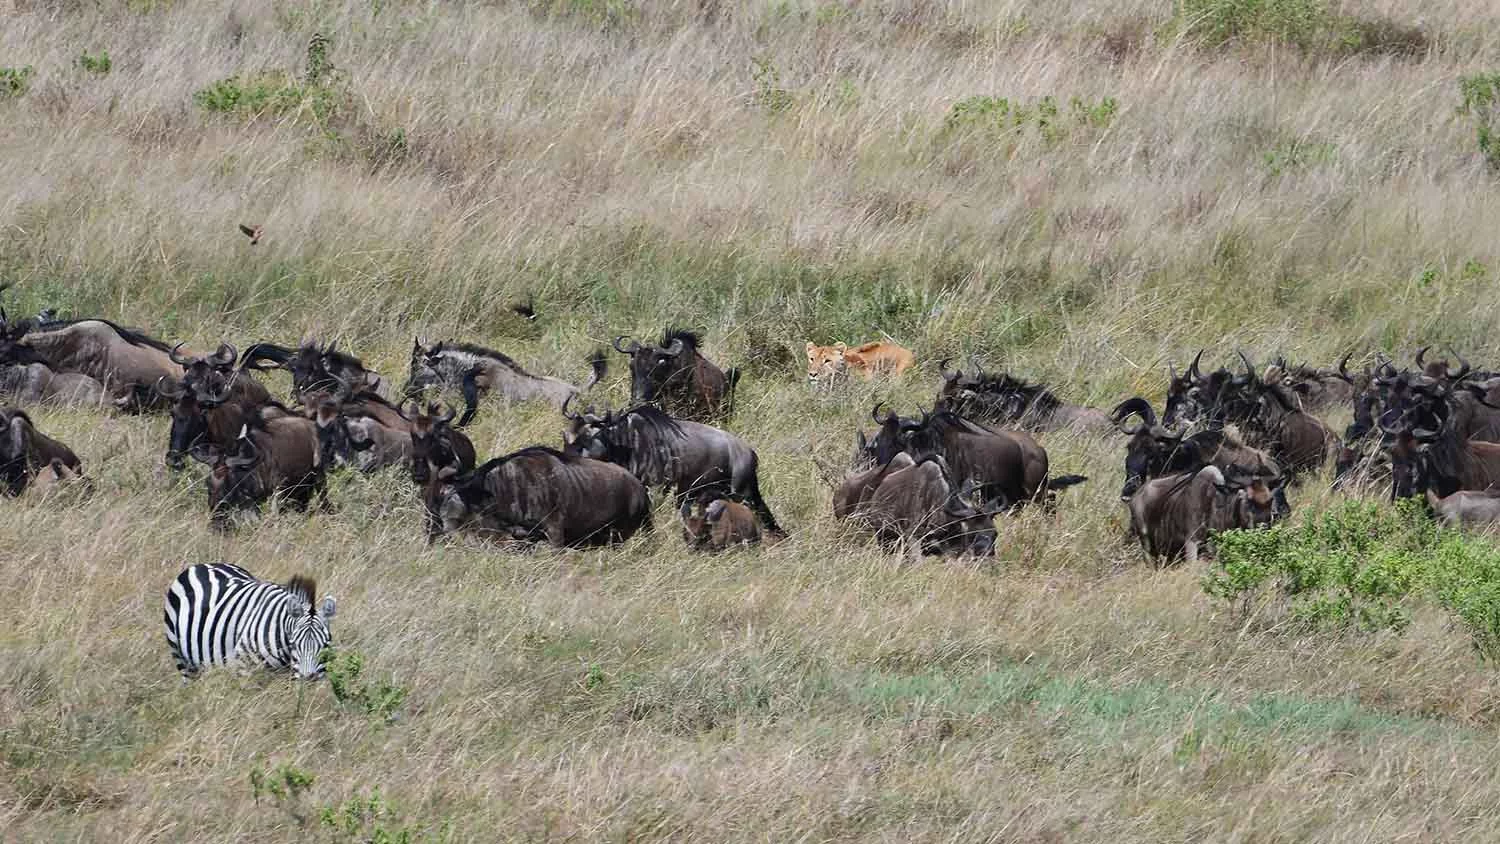 Witnessing the Great Migration Masai Mara action - A lioness trailing wildebeest herds